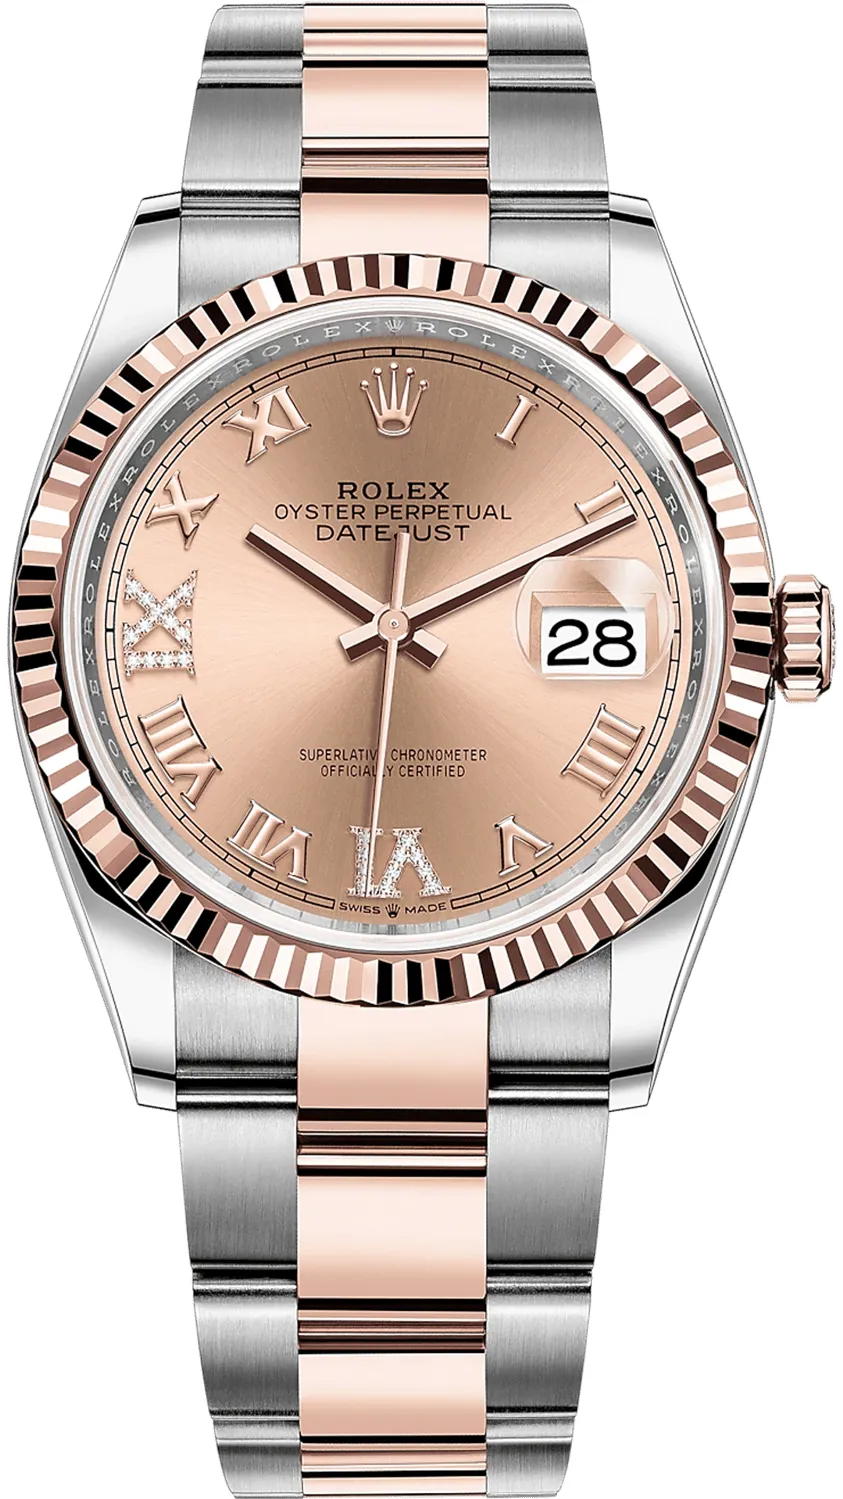 Rolex Datejust 126231-0028 36mm Yellow gold and stainless steel